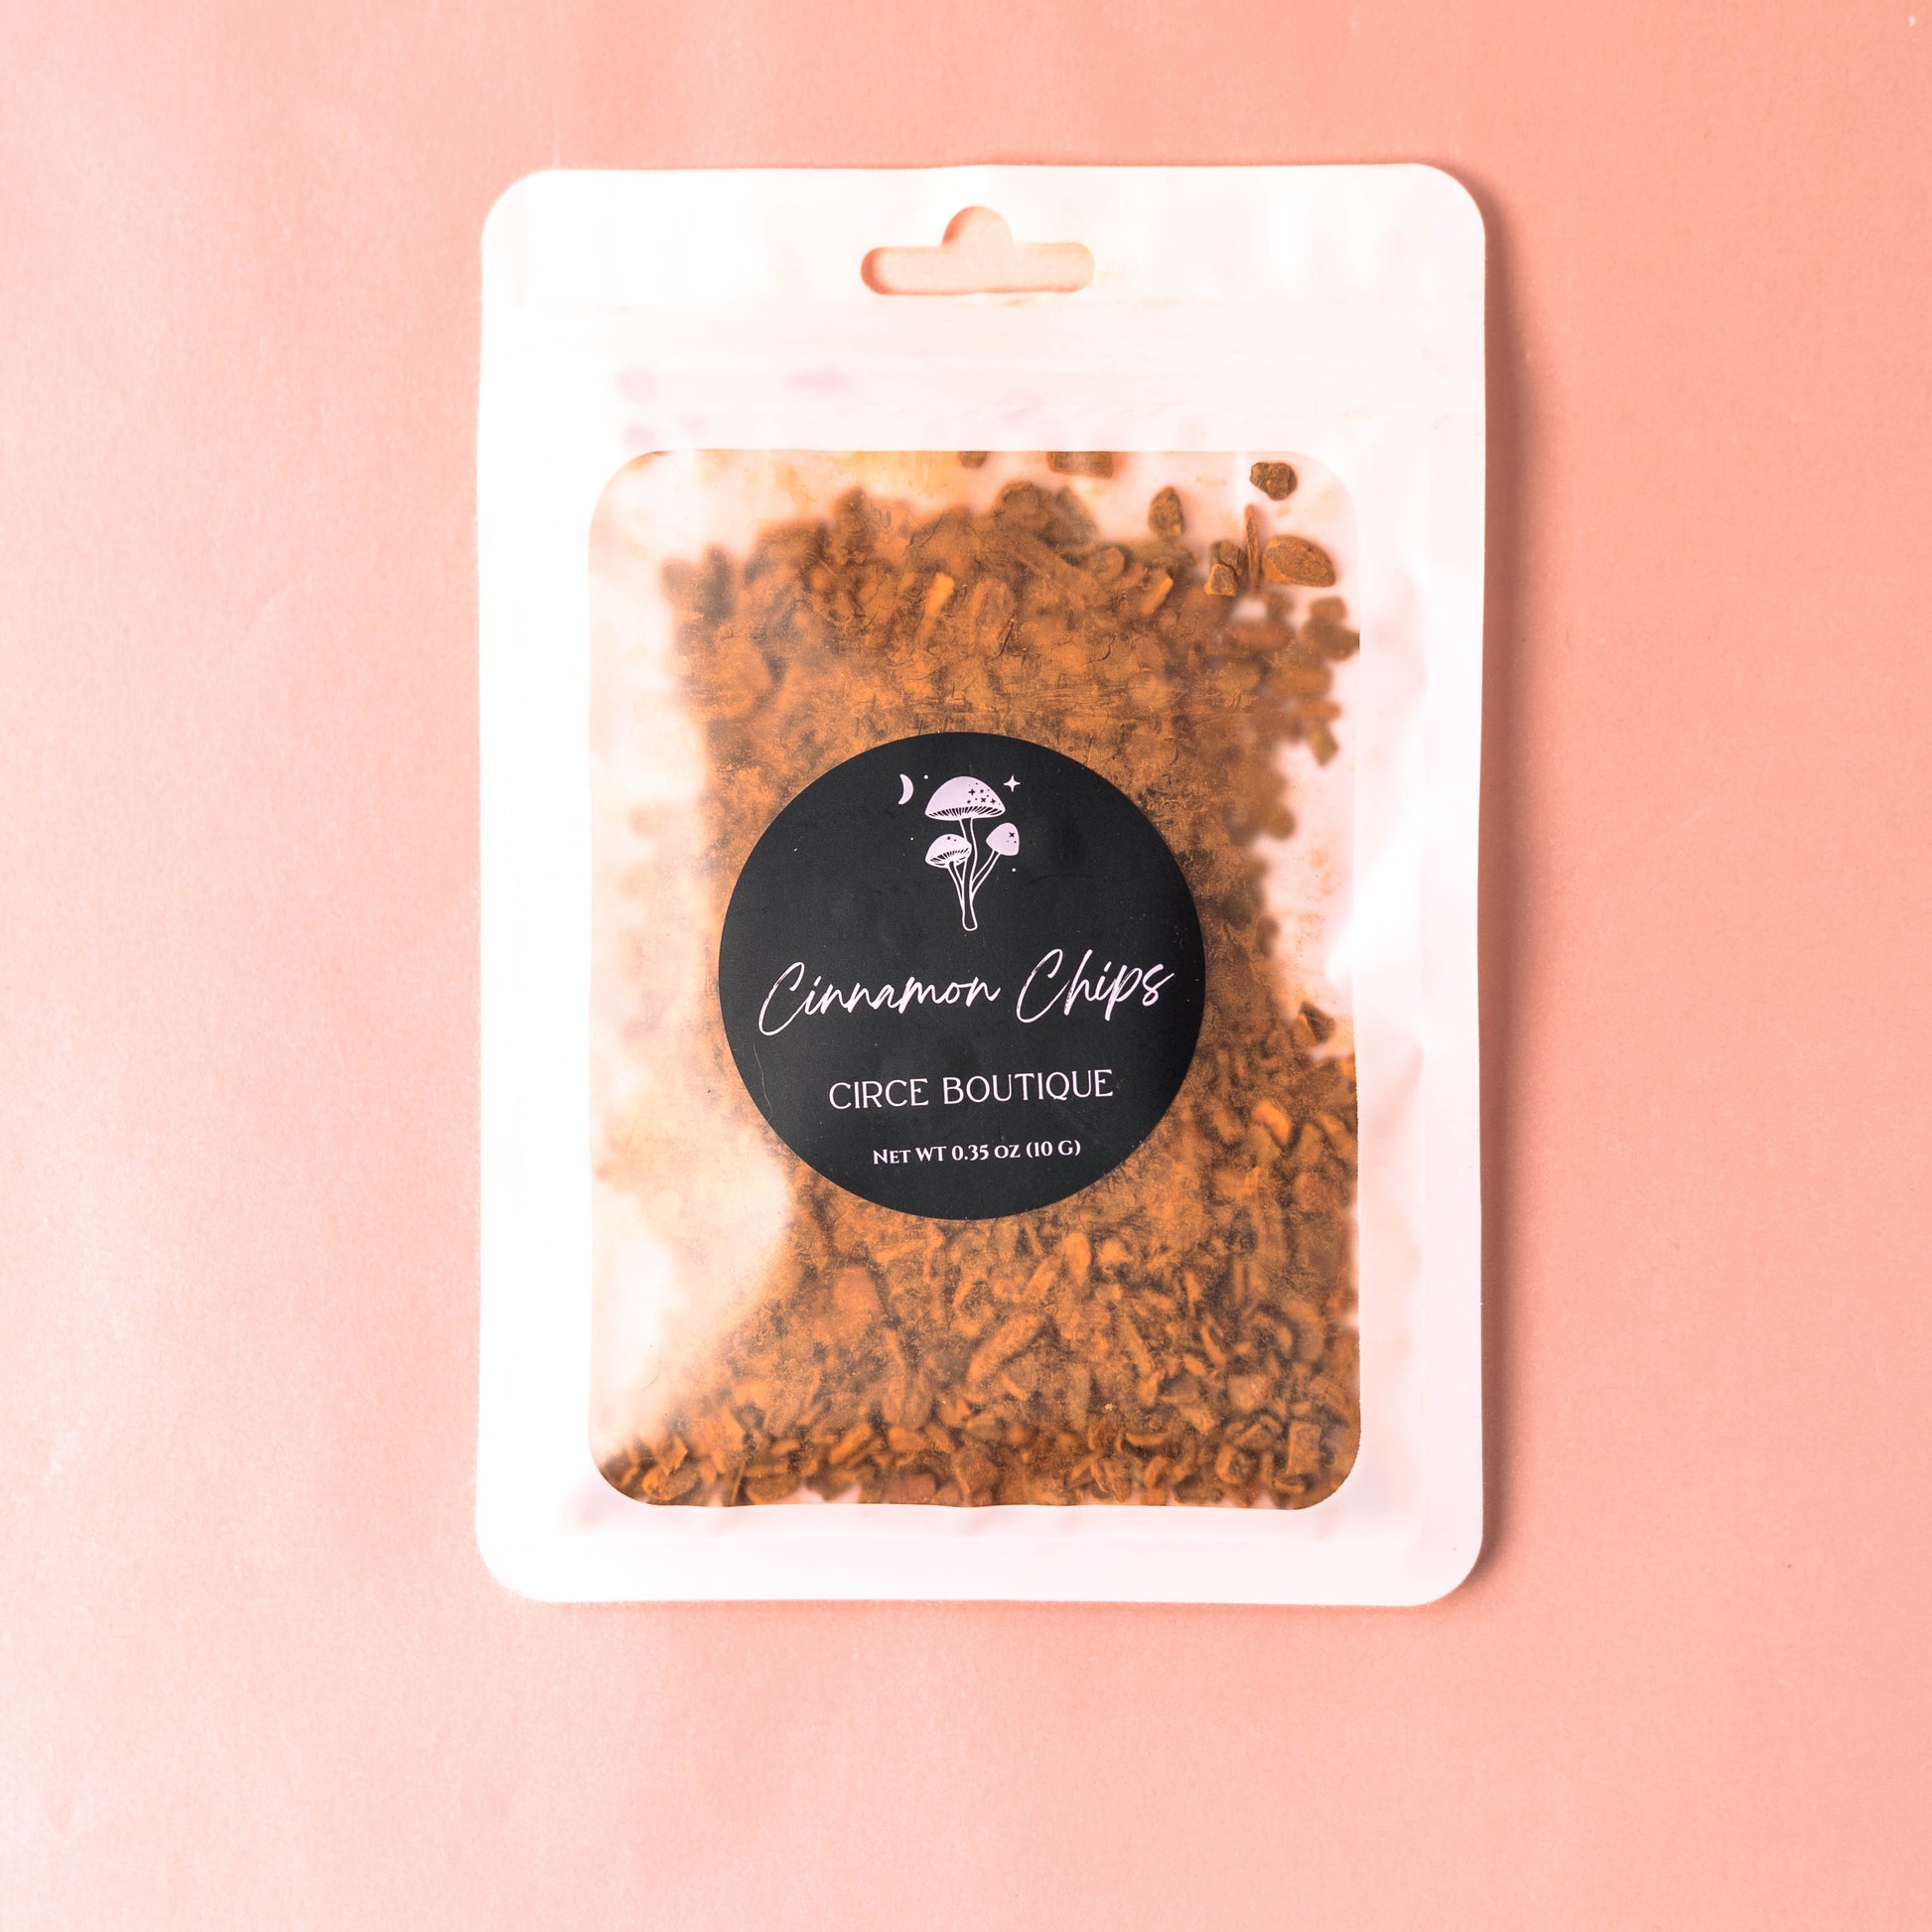 CIRCE Cinnamon Chips .35 oz. - Herbs  from CirceBoutique